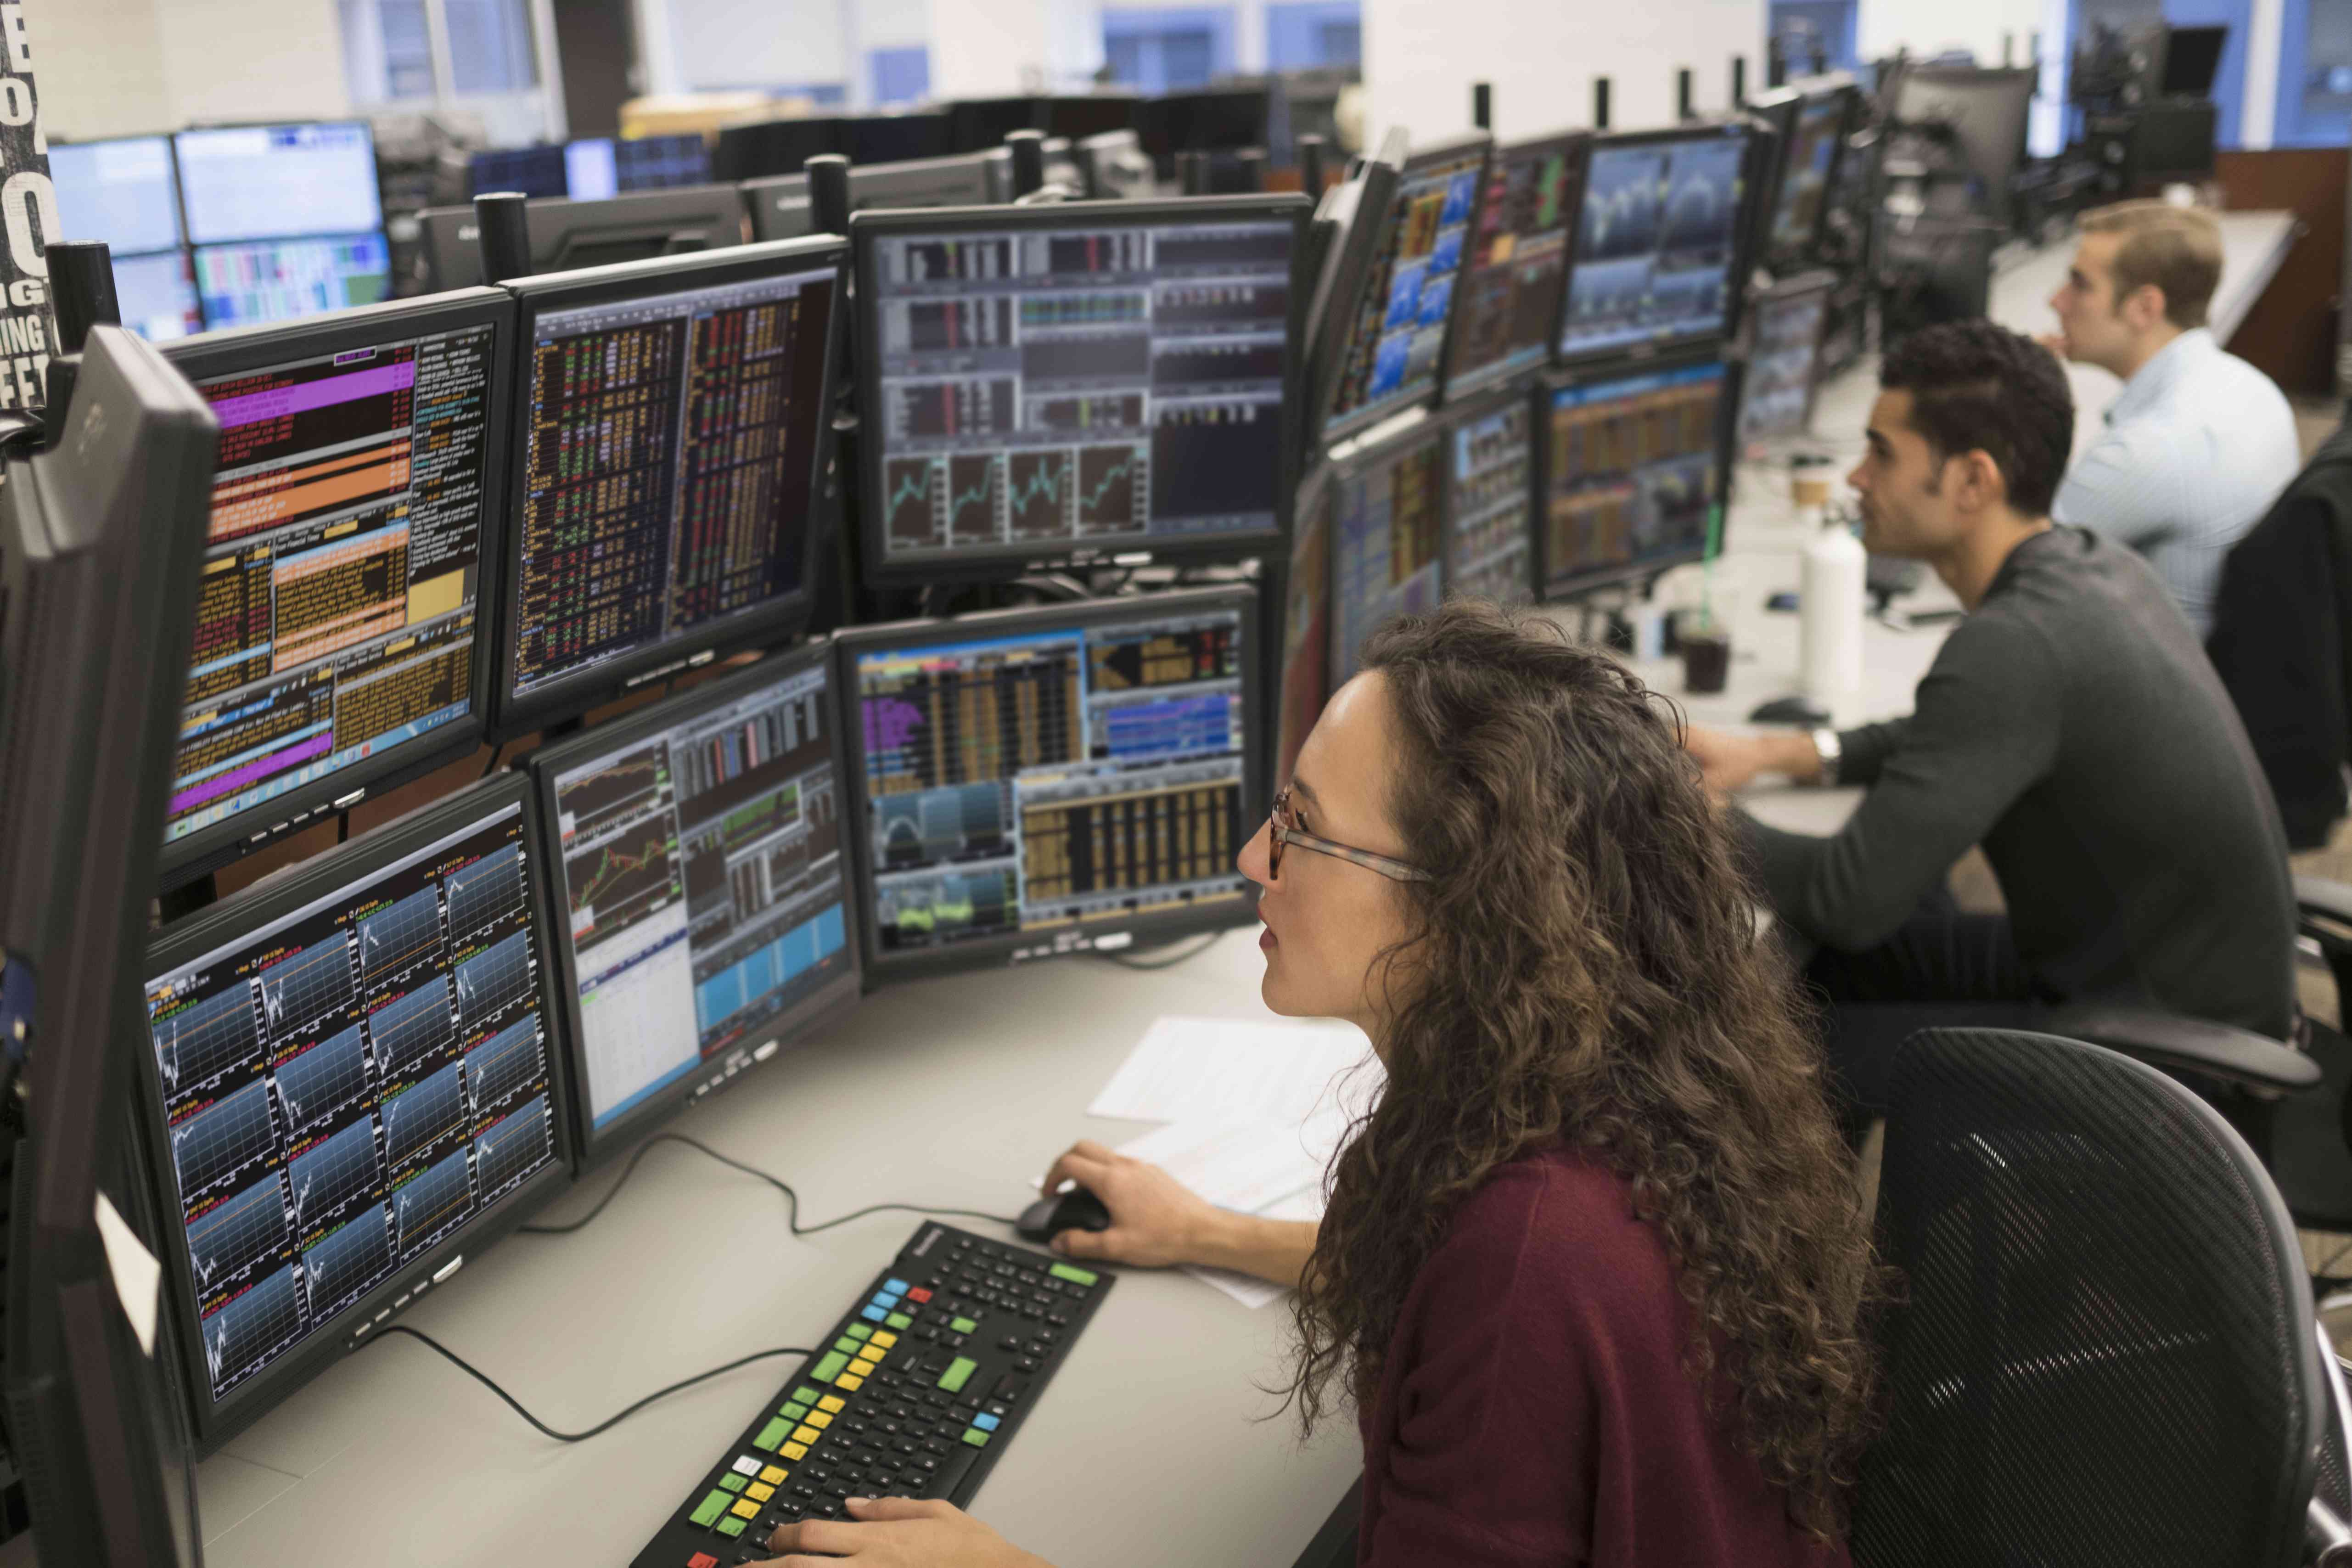 A row of traders at trading desks in a brokerage use computer systems with multiple screens to enter orders for clients.